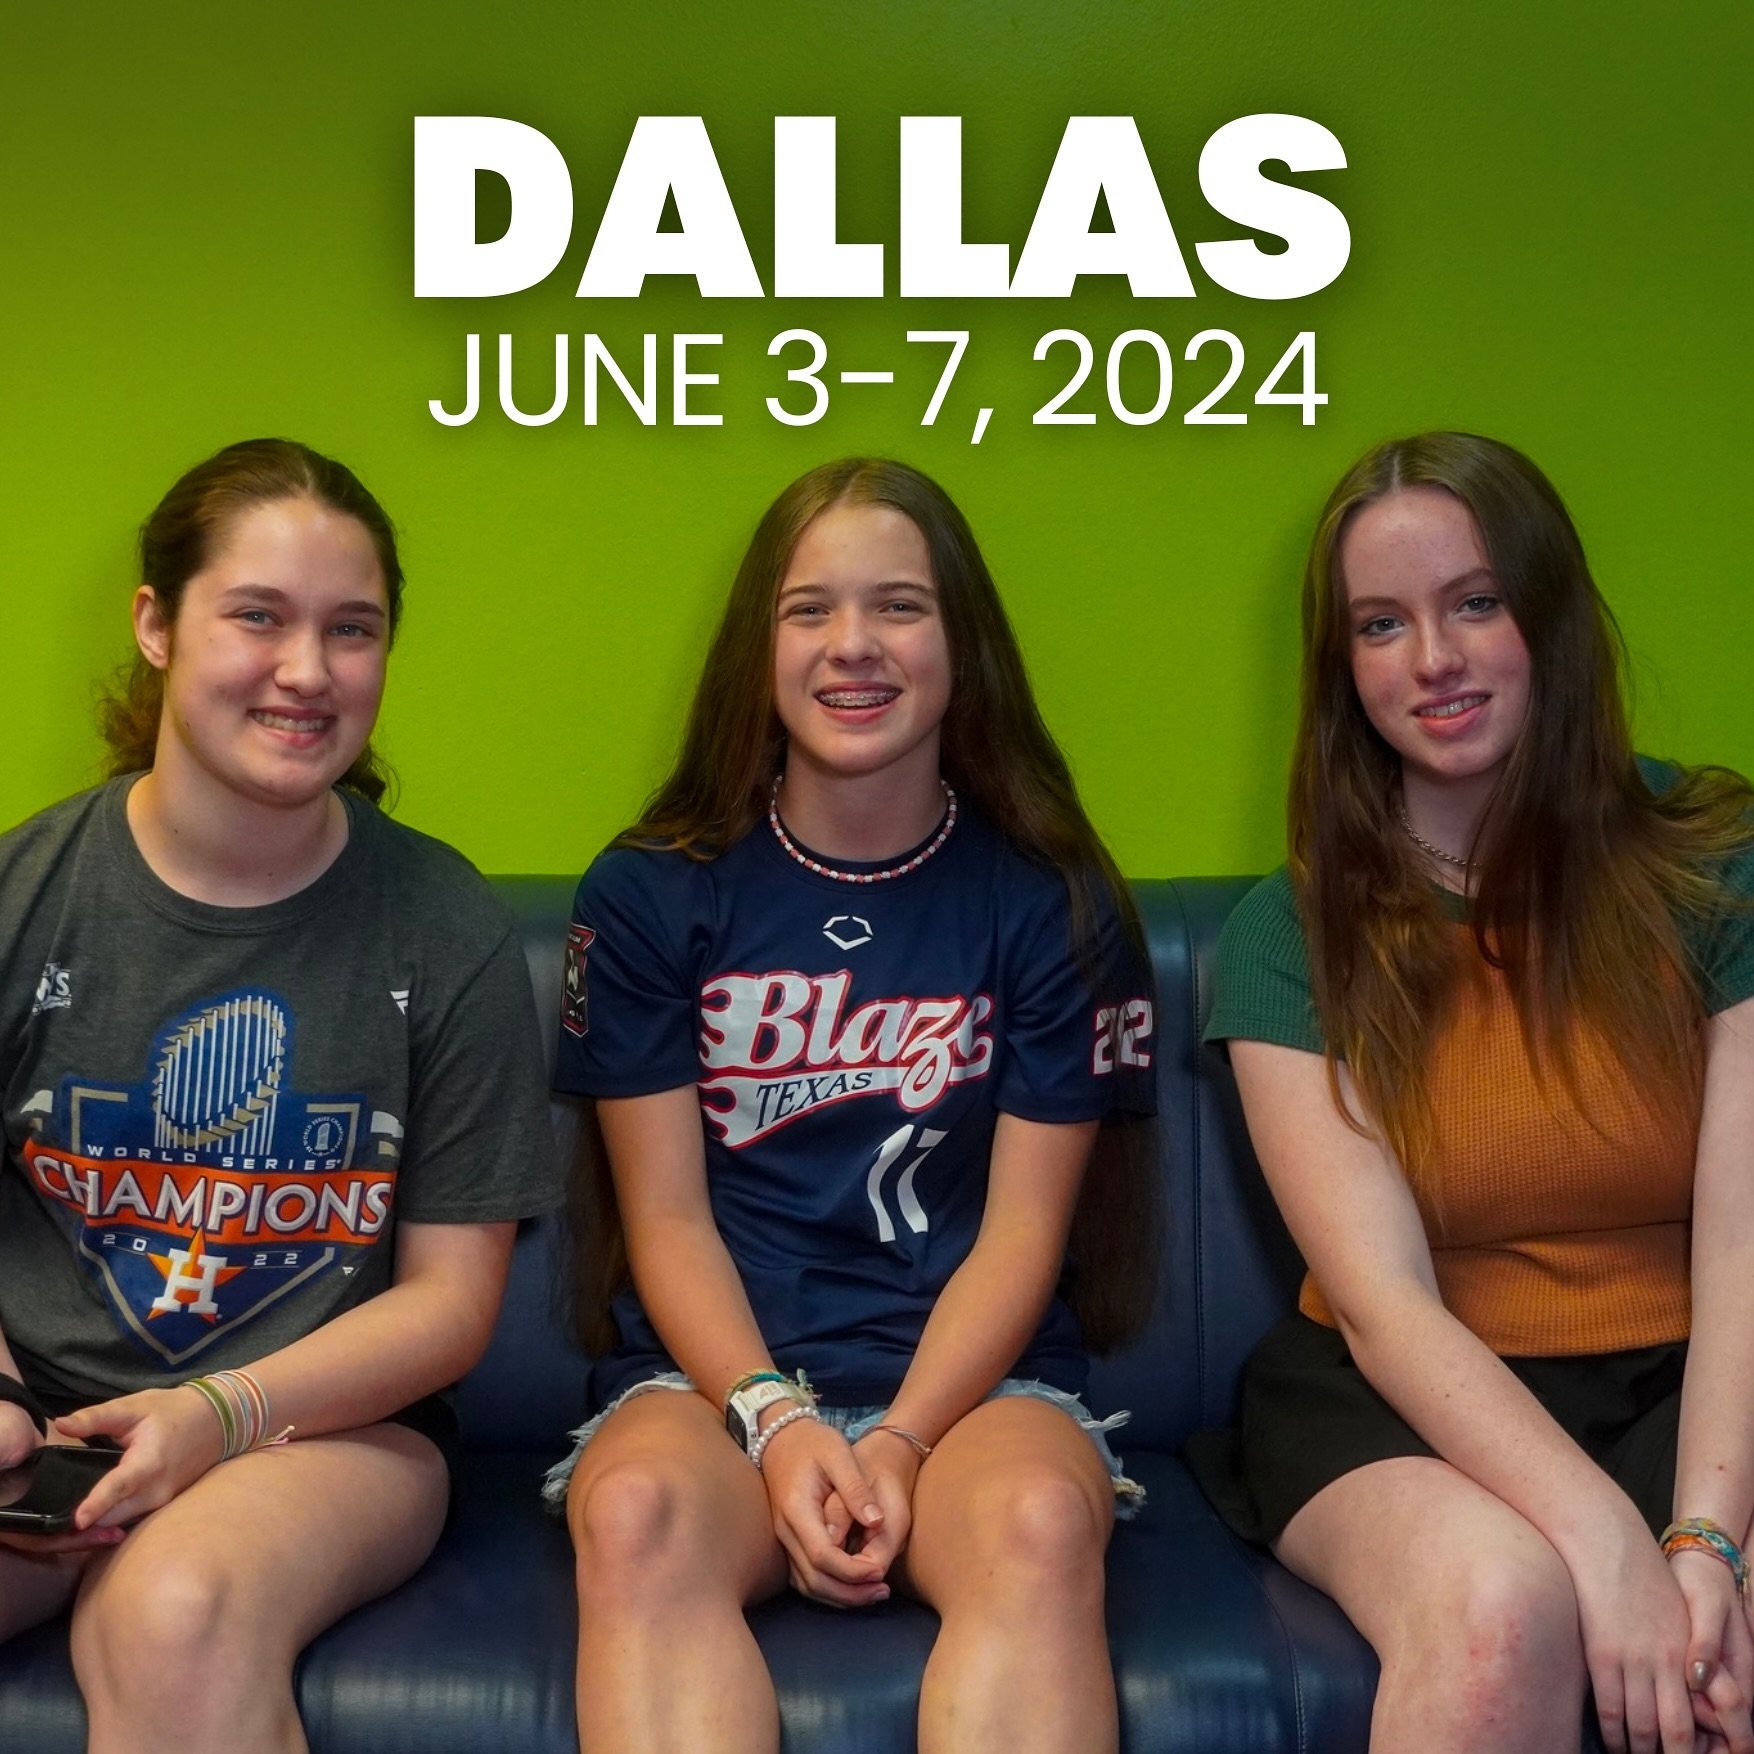 The 2024 summer camp season is right around the corner and we&rsquo;re kicking things off in DALLAS, TEXAS! 🥳

Sports fanatics ages 10-18 can attend day or overnight camp at Southern Methodist University and learn all aspects of #sportsbroadcasting 